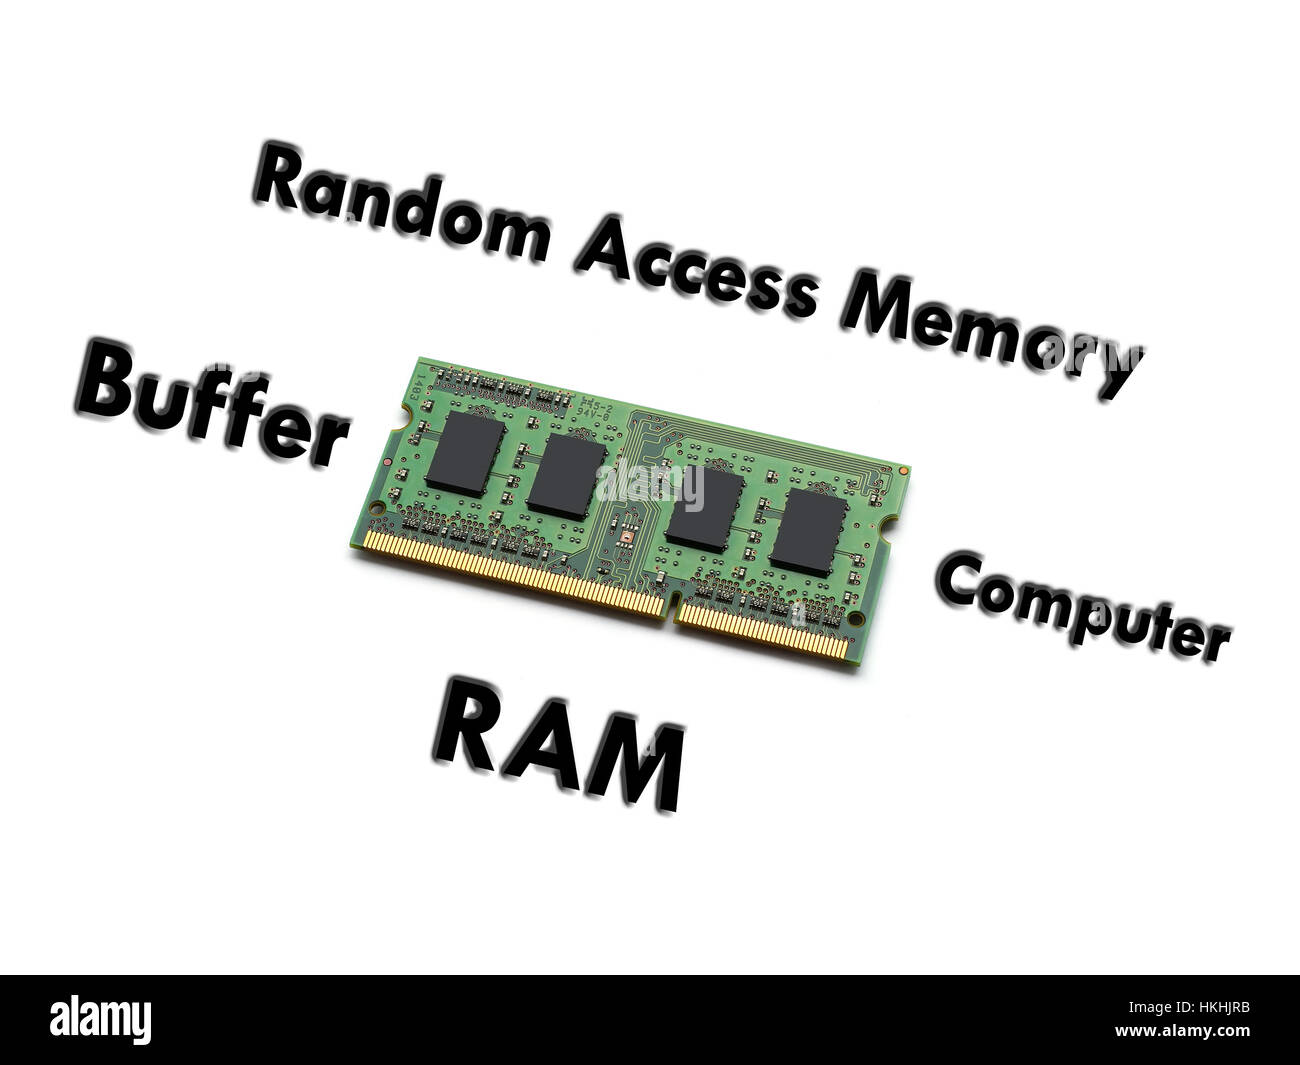 Labtop RAM or Notebook RAM with related information text Stock Photo